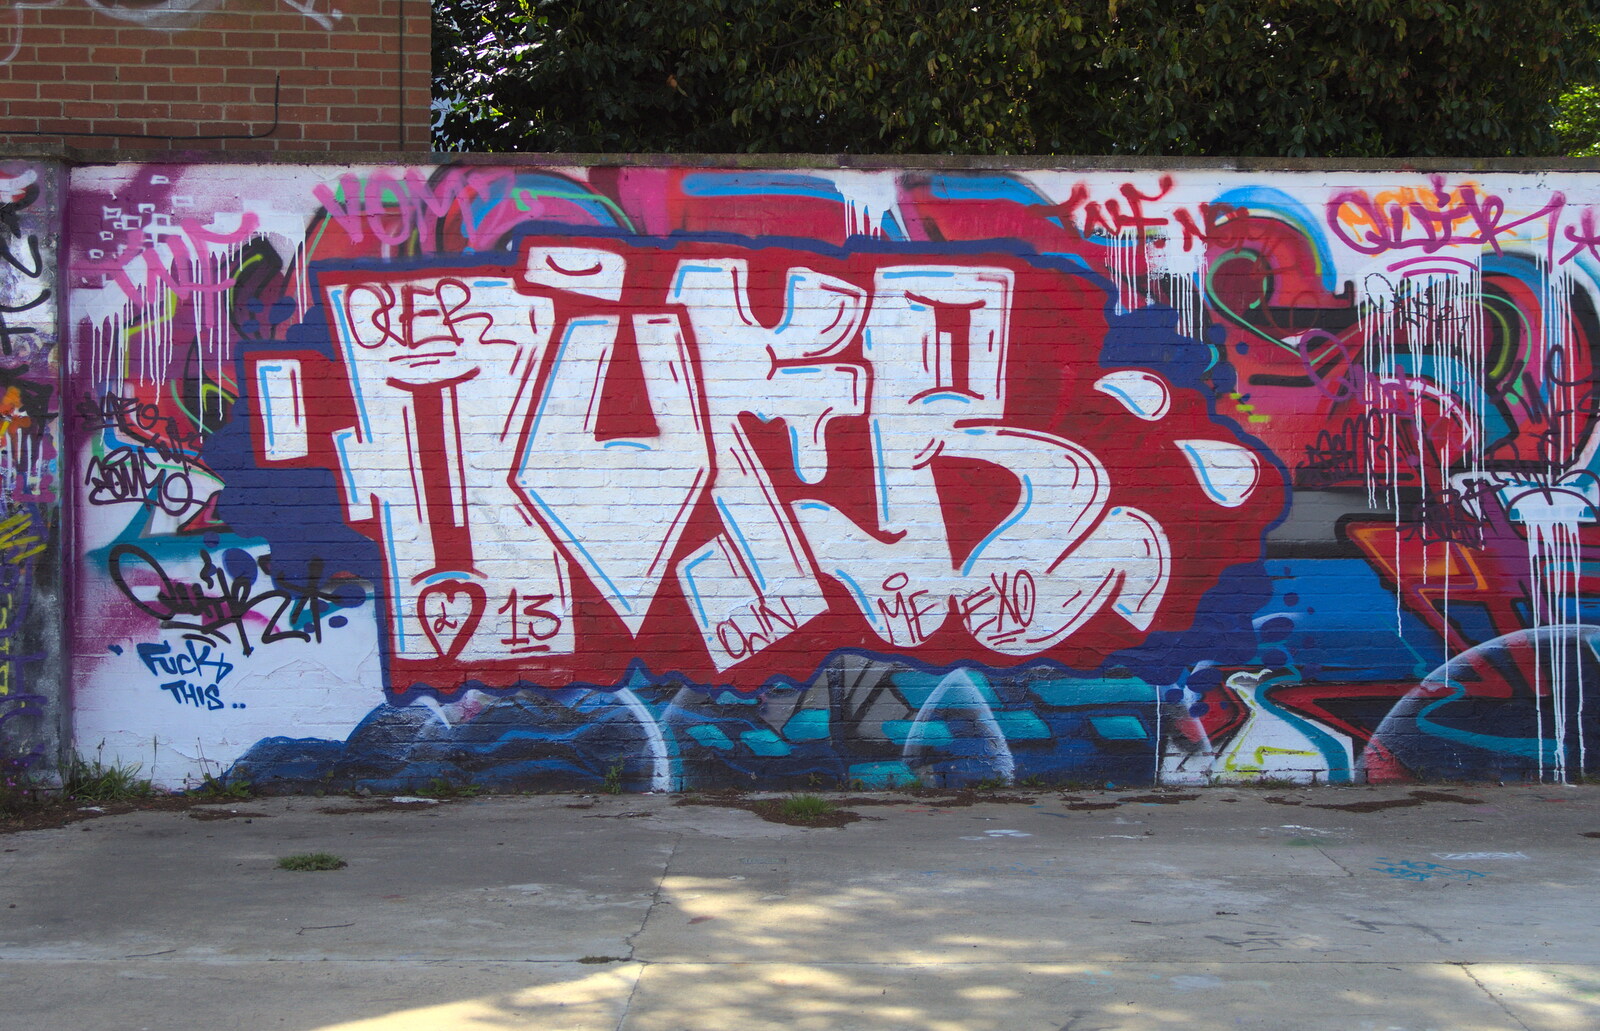 More recent graffiti from The Dereliction of HMSO, Botolph Street, Norwich - 26th May 2013